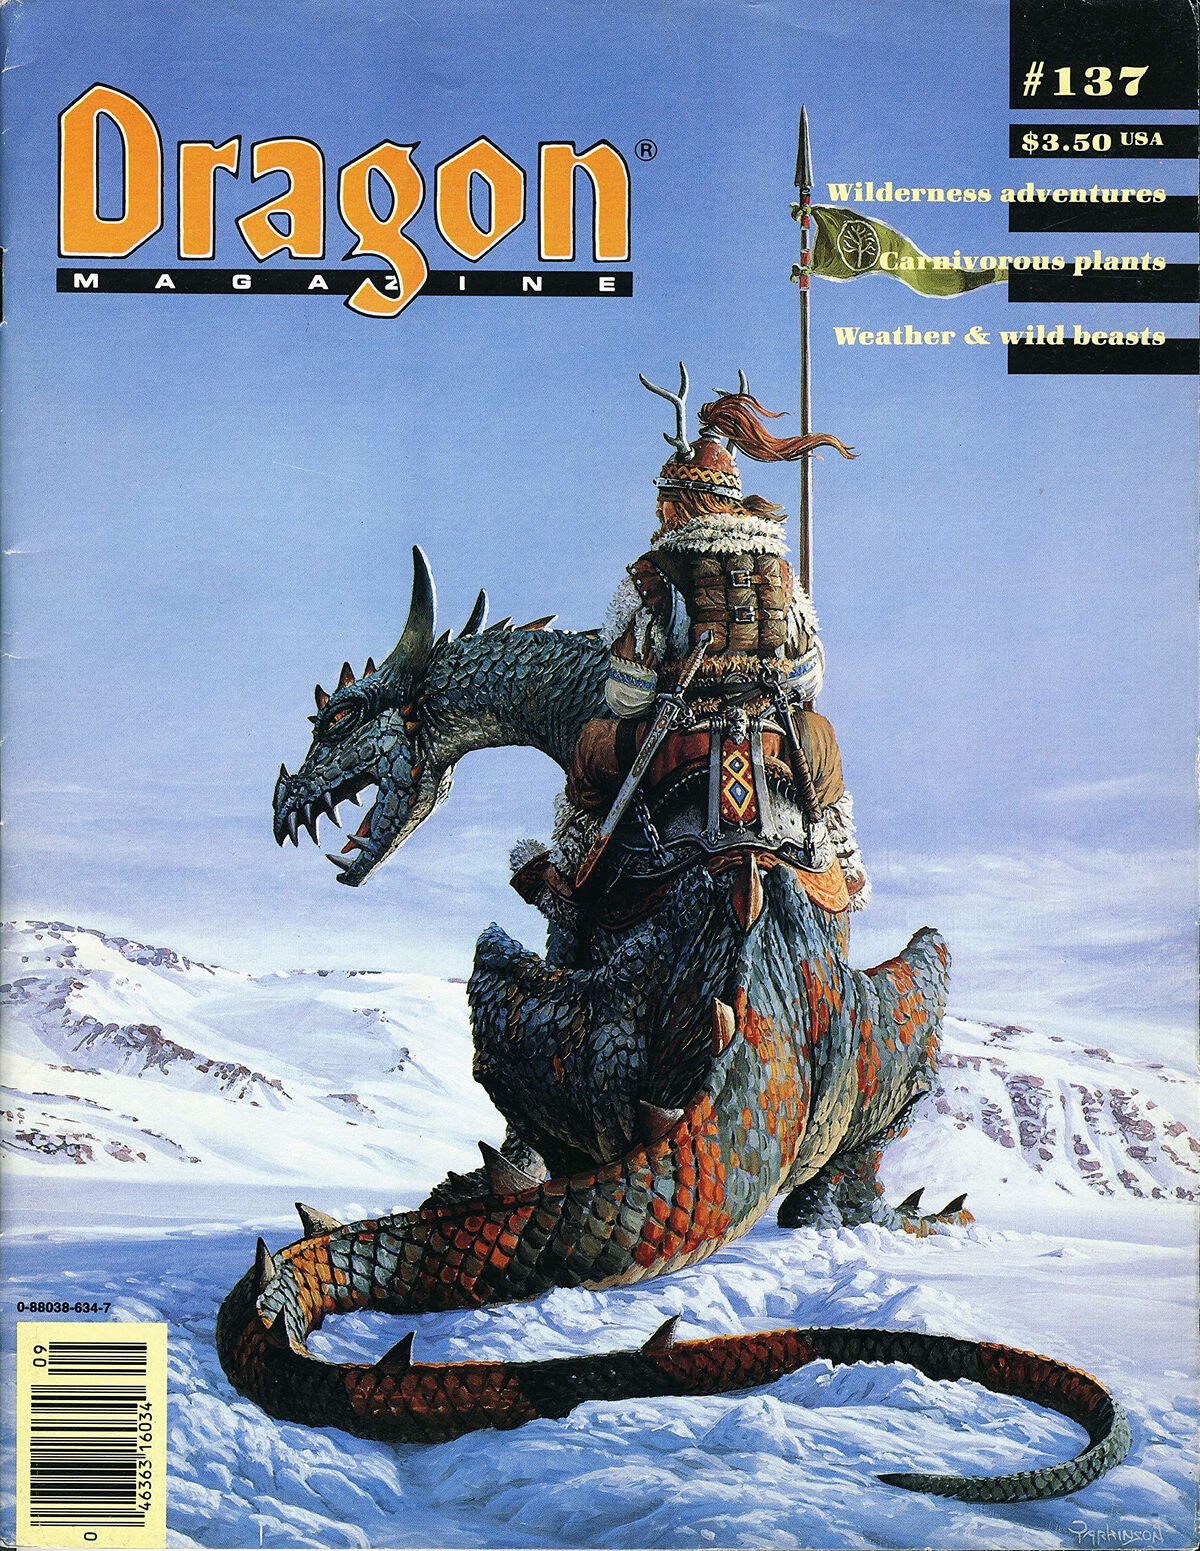 Dragon Magazine January 2022 Scans Includes Two New Illustrations